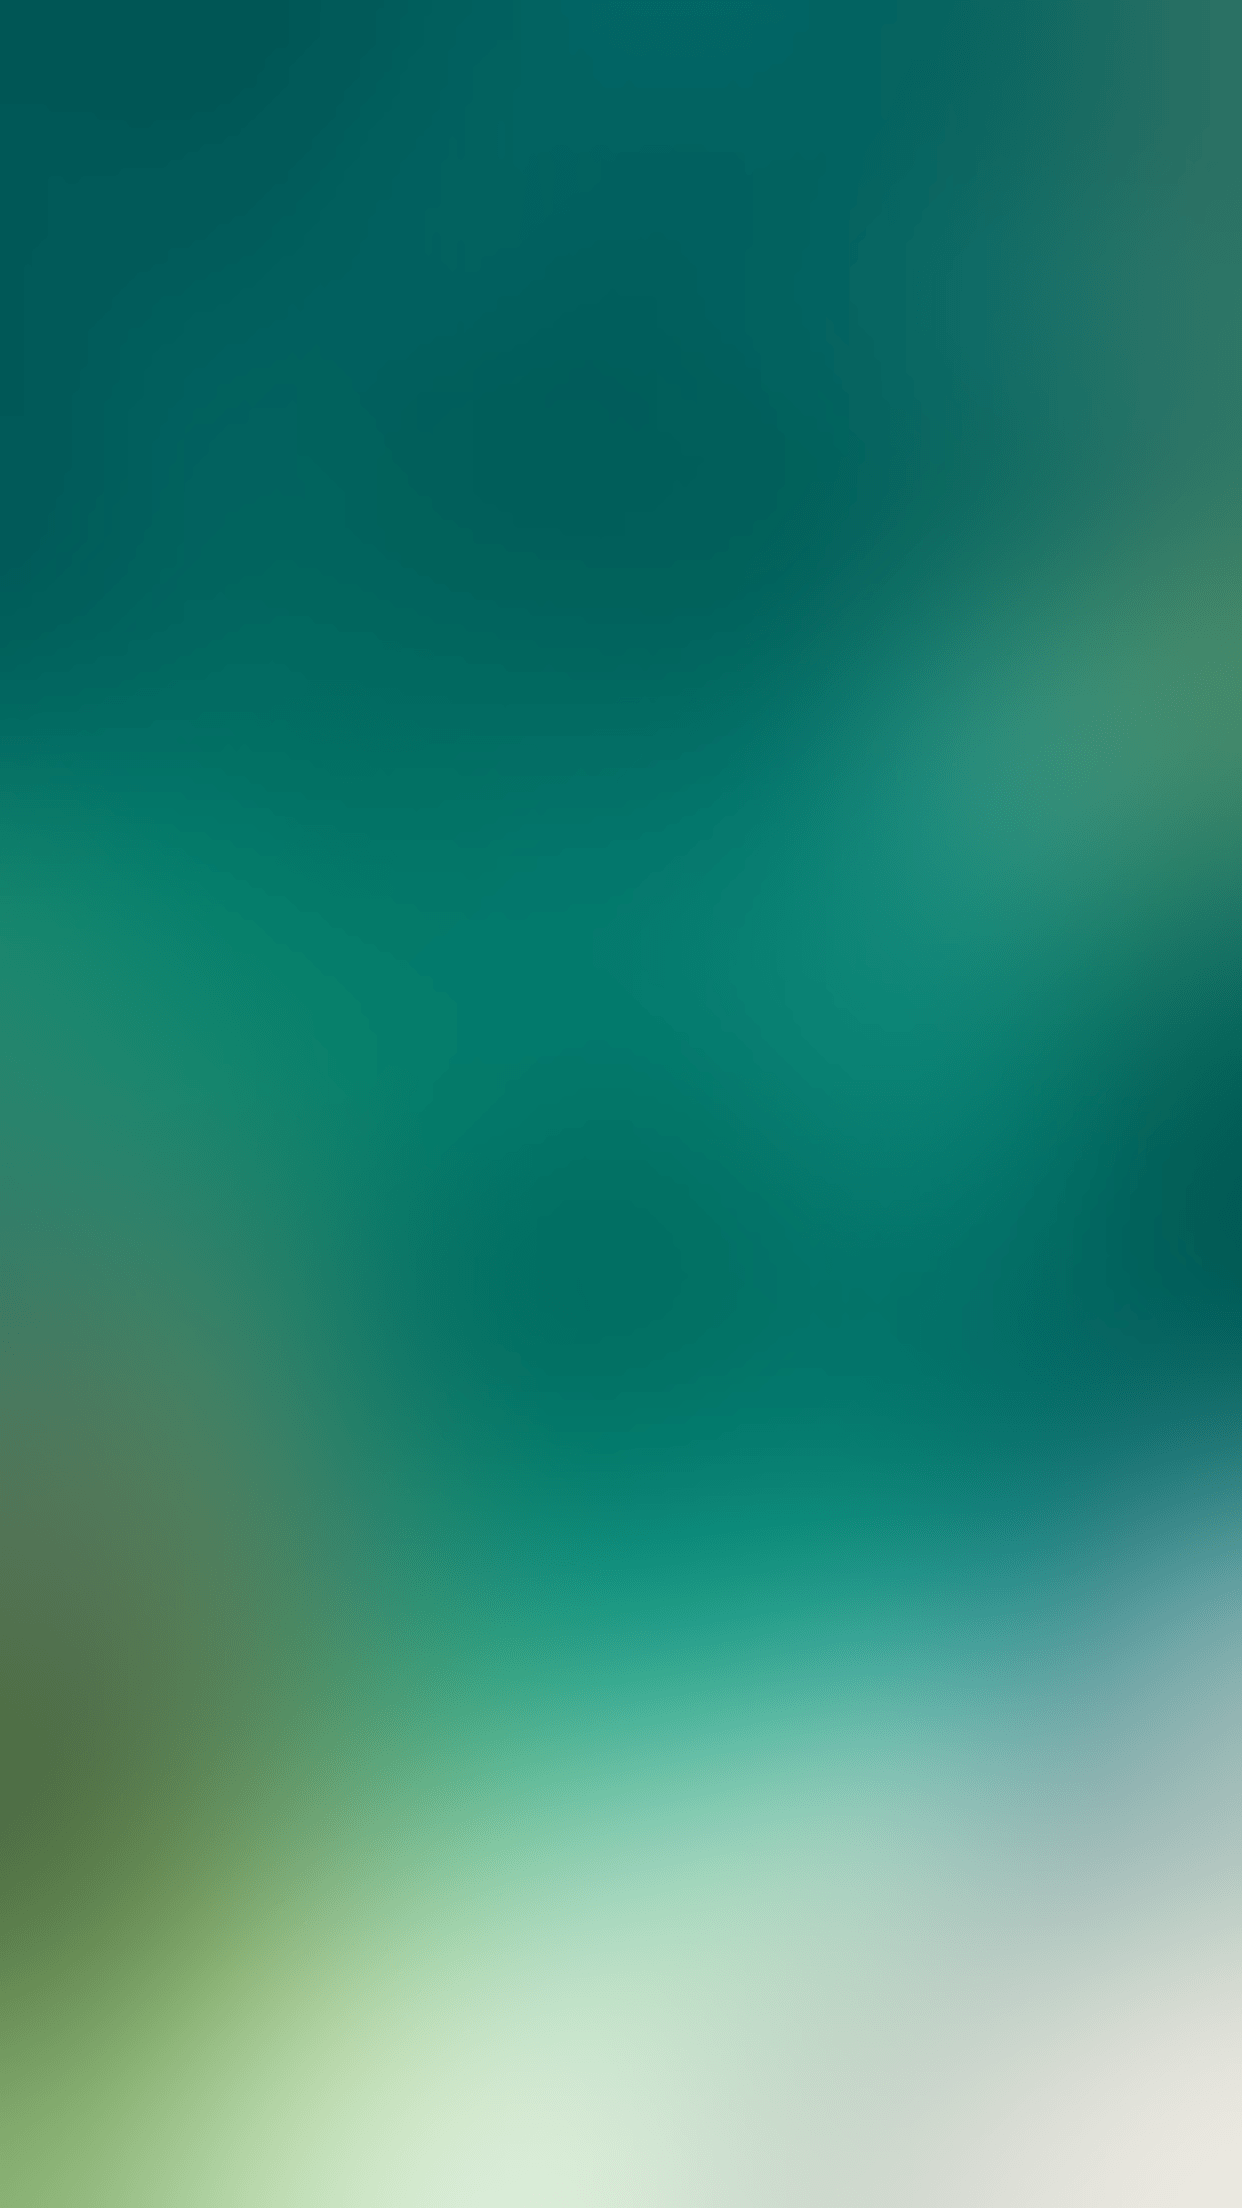 Wallpaper inspired by iOS 10 and the new Home app